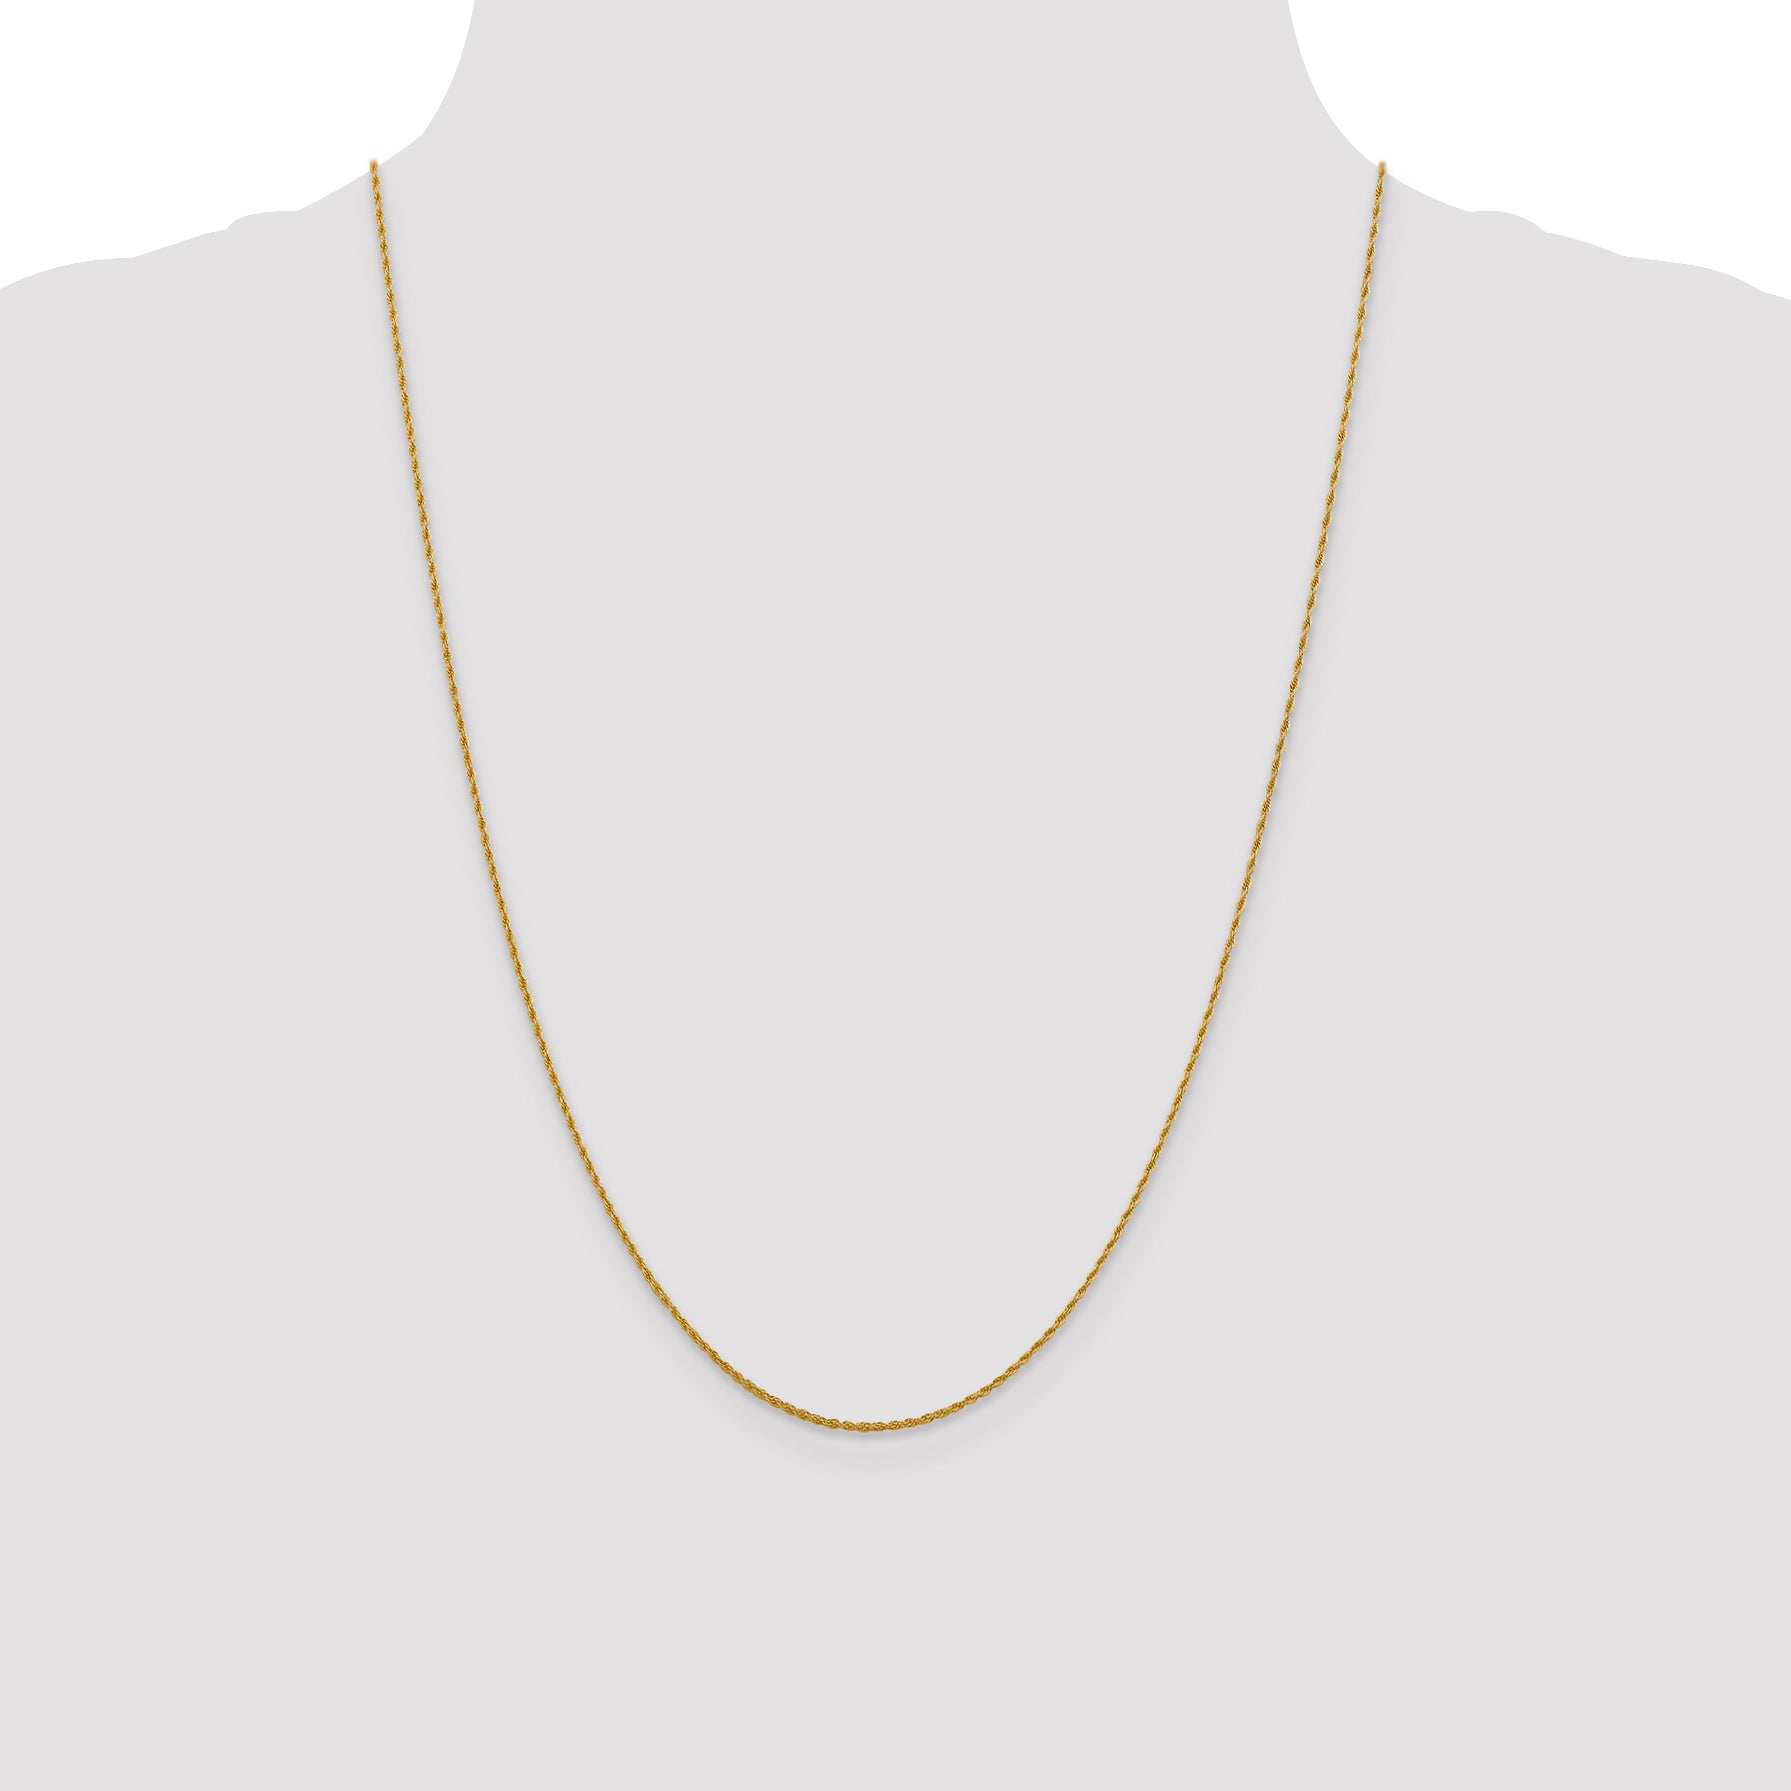 10K 1.2 mm Loose Rope Chain